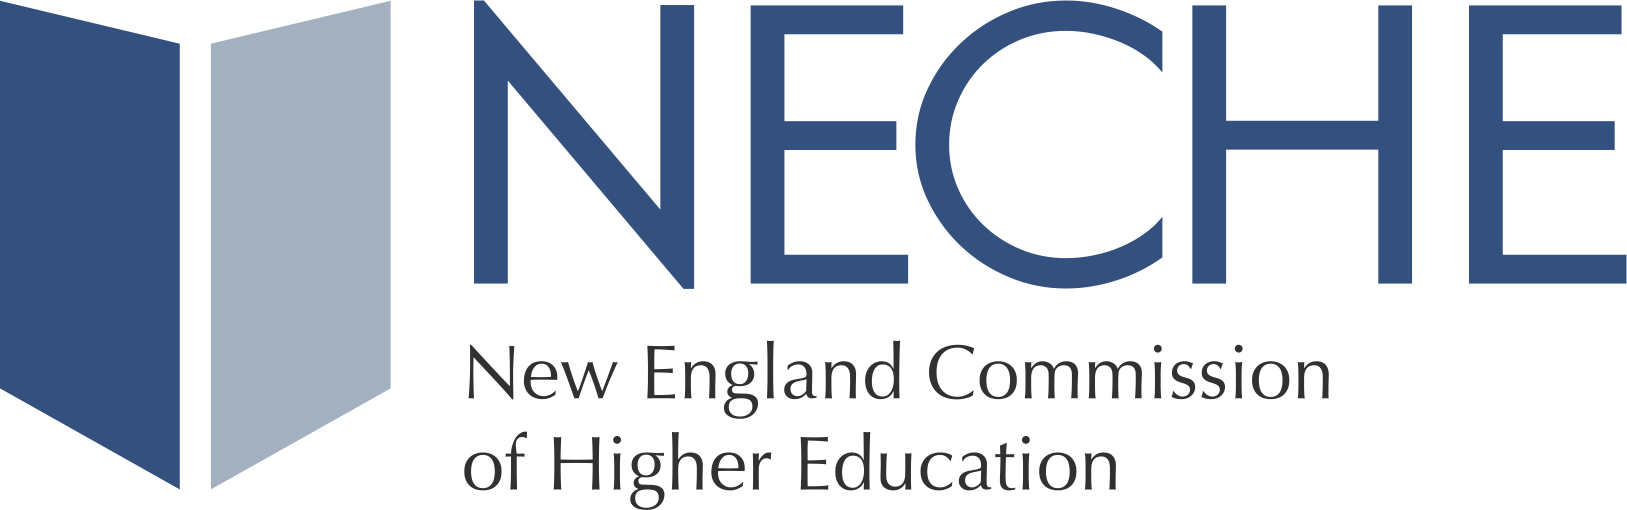 Accreditation Logo - New England Commission of Higher Education - NECHE